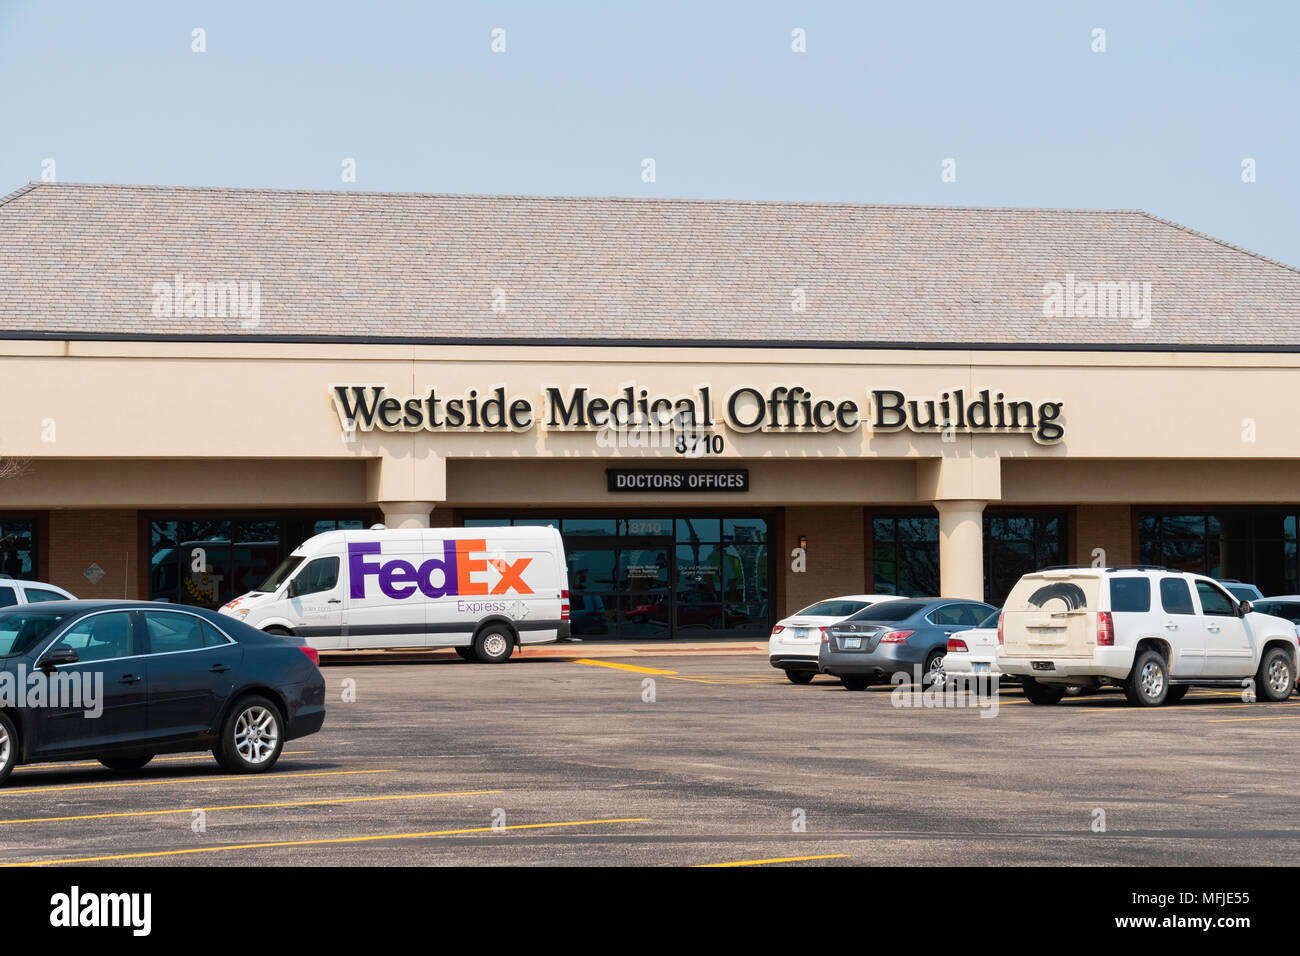 Westside Medical Office Building, a medical business in a strip mall in Wichita, Kansas, USA. Stock Photo